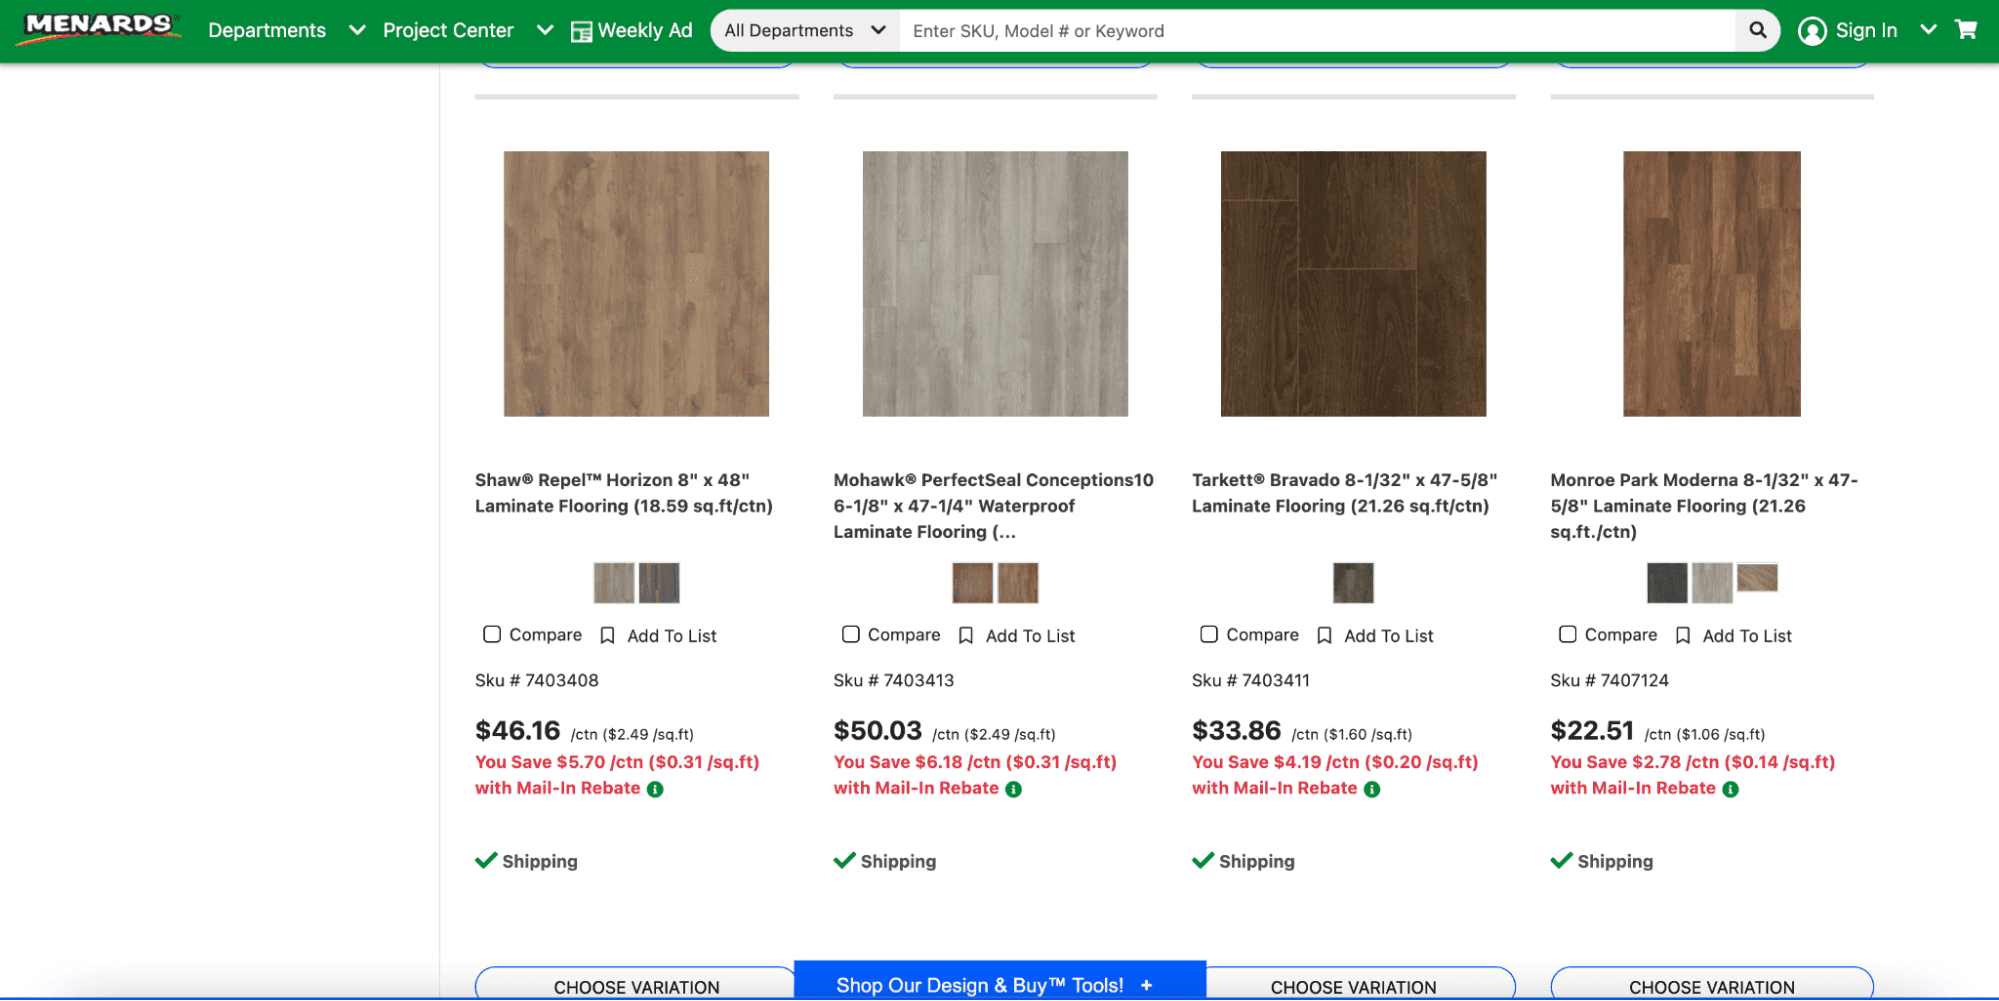 A screenshot from the Menards website, displaying products and how much the customer would save with the 11% rebate.